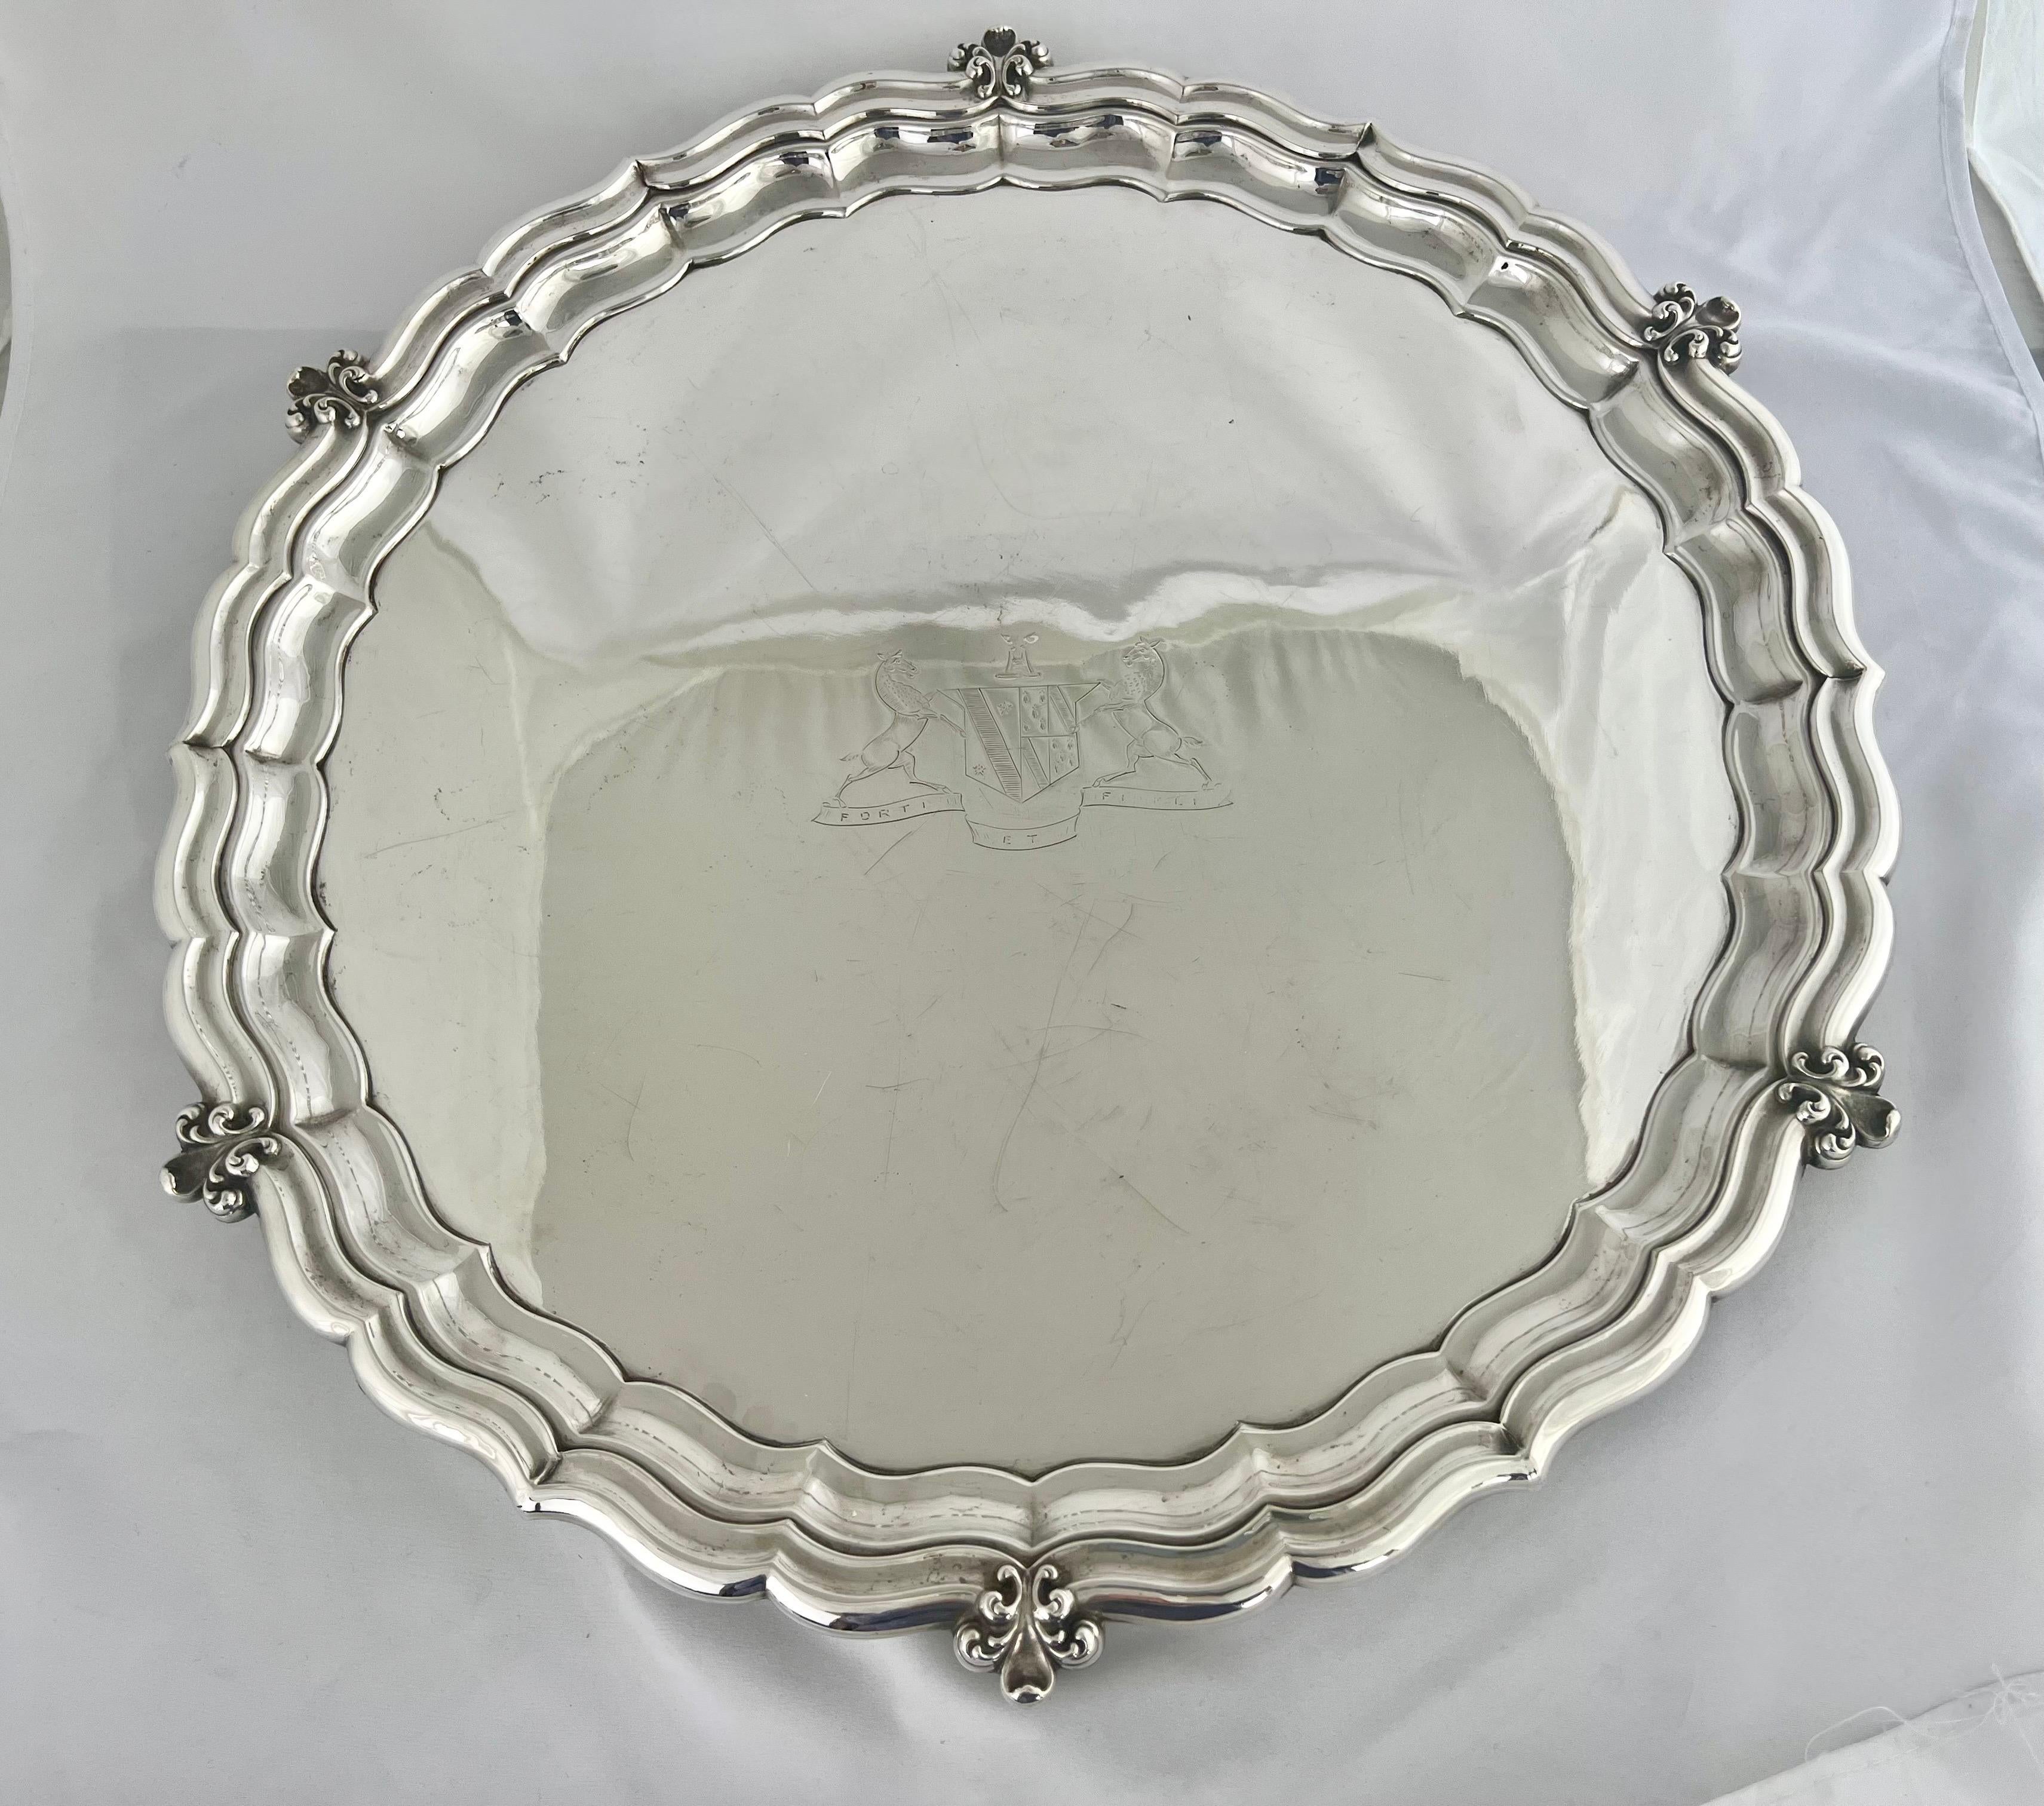 Early 20th century silver plate round tray with etched coat of arms depicting a pair of lions holding a sheld. The tray stands on five fleur dys lis feet. it is stamped 